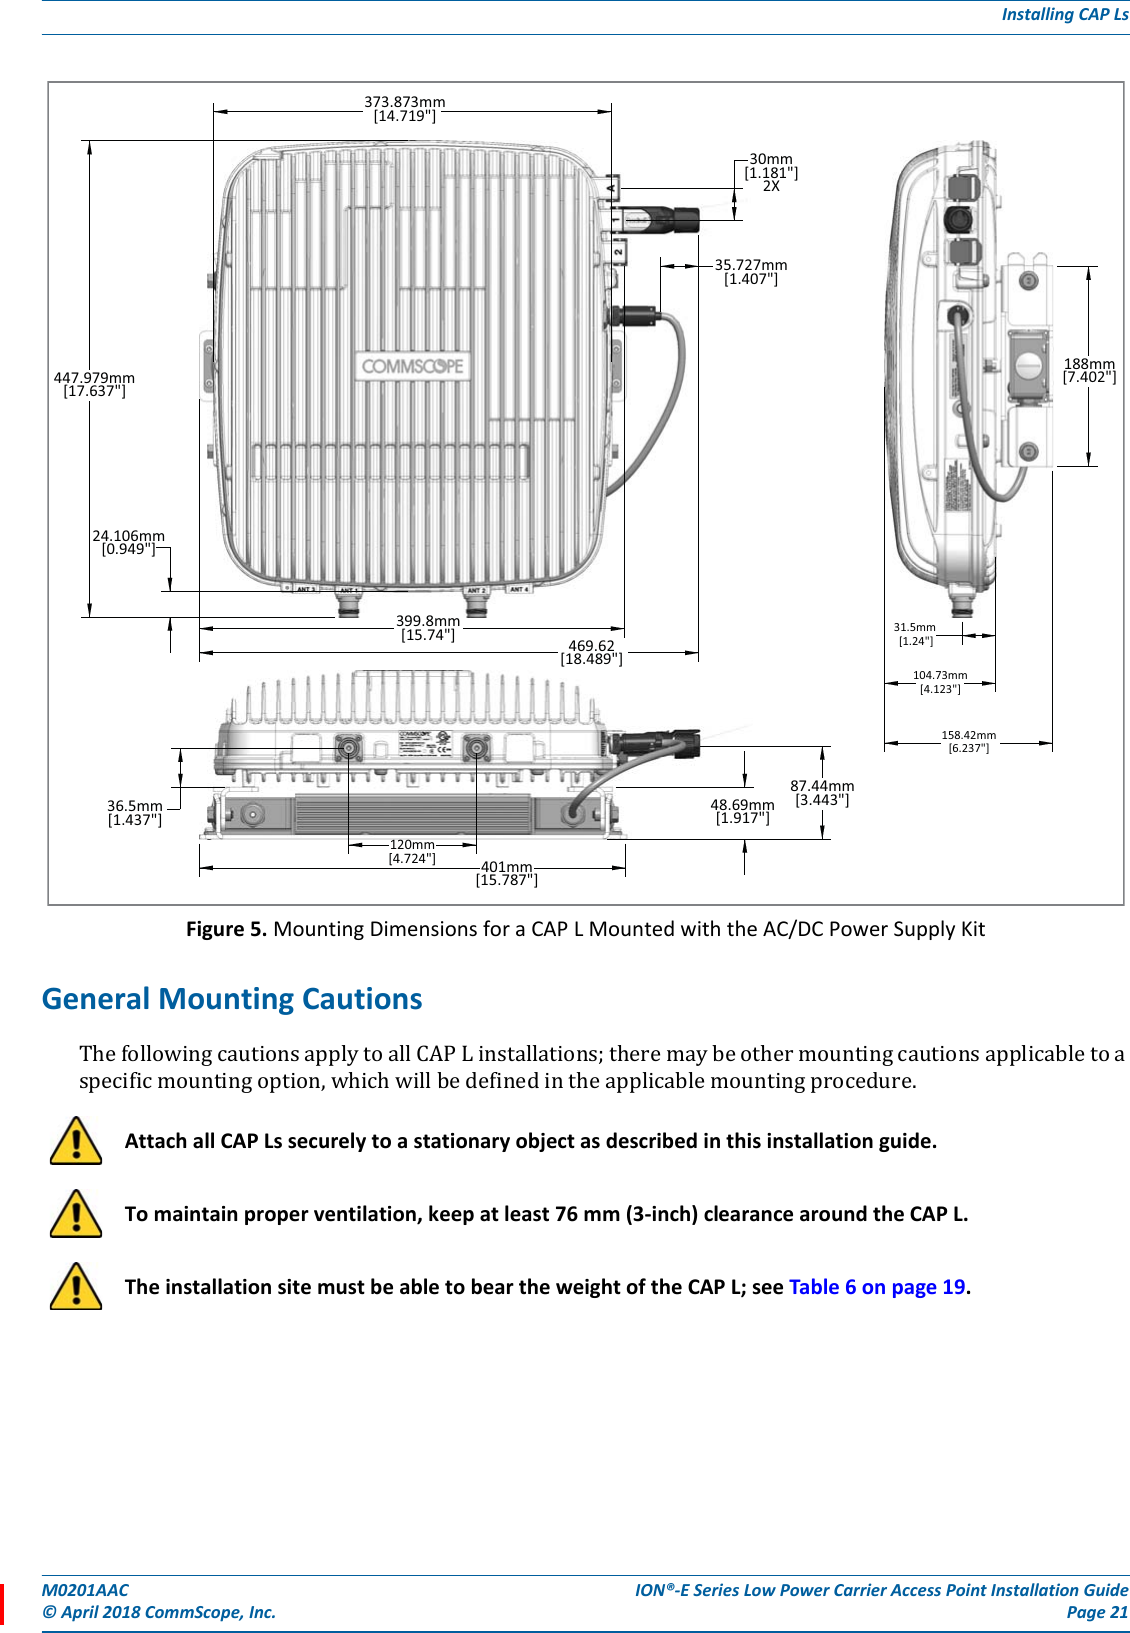 M0201AAC ION®-E Series Low Power Carrier Access Point Installation Guide© April 2018 CommScope, Inc. Page 21Installing CAP LsFigure 5. Mounting Dimensions for a CAP L Mounted with the AC/DC Power Supply KitGeneral Mounting CautionsThefollowingcautionsapplytoallCAPLinstallations;theremaybeothermountingcautionsapplicabletoaspecificmountingoption,whichwillbedefinedintheapplicablemountingprocedure.Attach all CAP Ls securely to a stationary object as described in this installation guide.To maintain proper ventilation, keep at least 76 mm (3-inch) clearance around the CAP L. The installation site must be able to bear the weight of the CAP L; see Table 6 on page 19.120mm[4.724&quot;]36.5mm[1.437&quot;]48.69mm[1.917&quot;]447.979mm[17.637&quot;]24.106mm[0.949&quot;]373.873mm[14.719&quot;]87.44mm[3.443&quot;]399.8mm[15.74&quot;] 469.62[18.489&quot;]35.727mm[1.407&quot;]30mm[1.181&quot;]2X401mm[15.787&quot;]158.42mm[6.237&quot;]188mm[7.402&quot;]104.73mm[4.123&quot;]31.5mm[1.24&quot;]